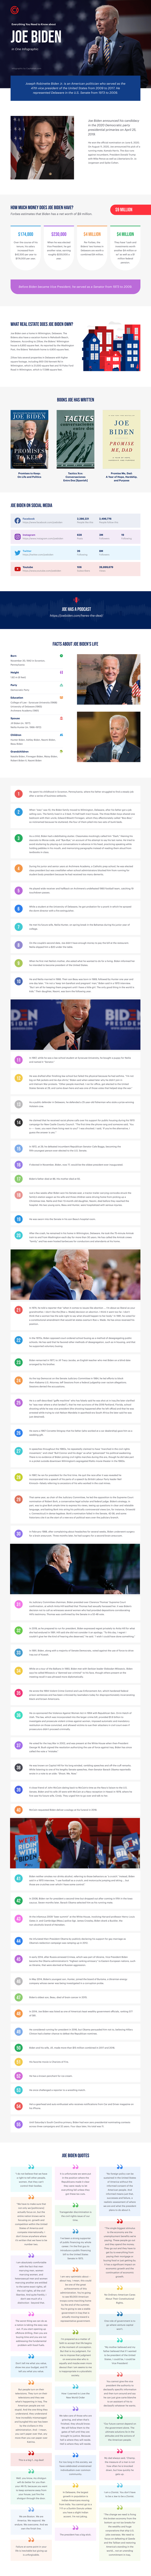 Everything You Need To Know About Joe Biden In One Infographic